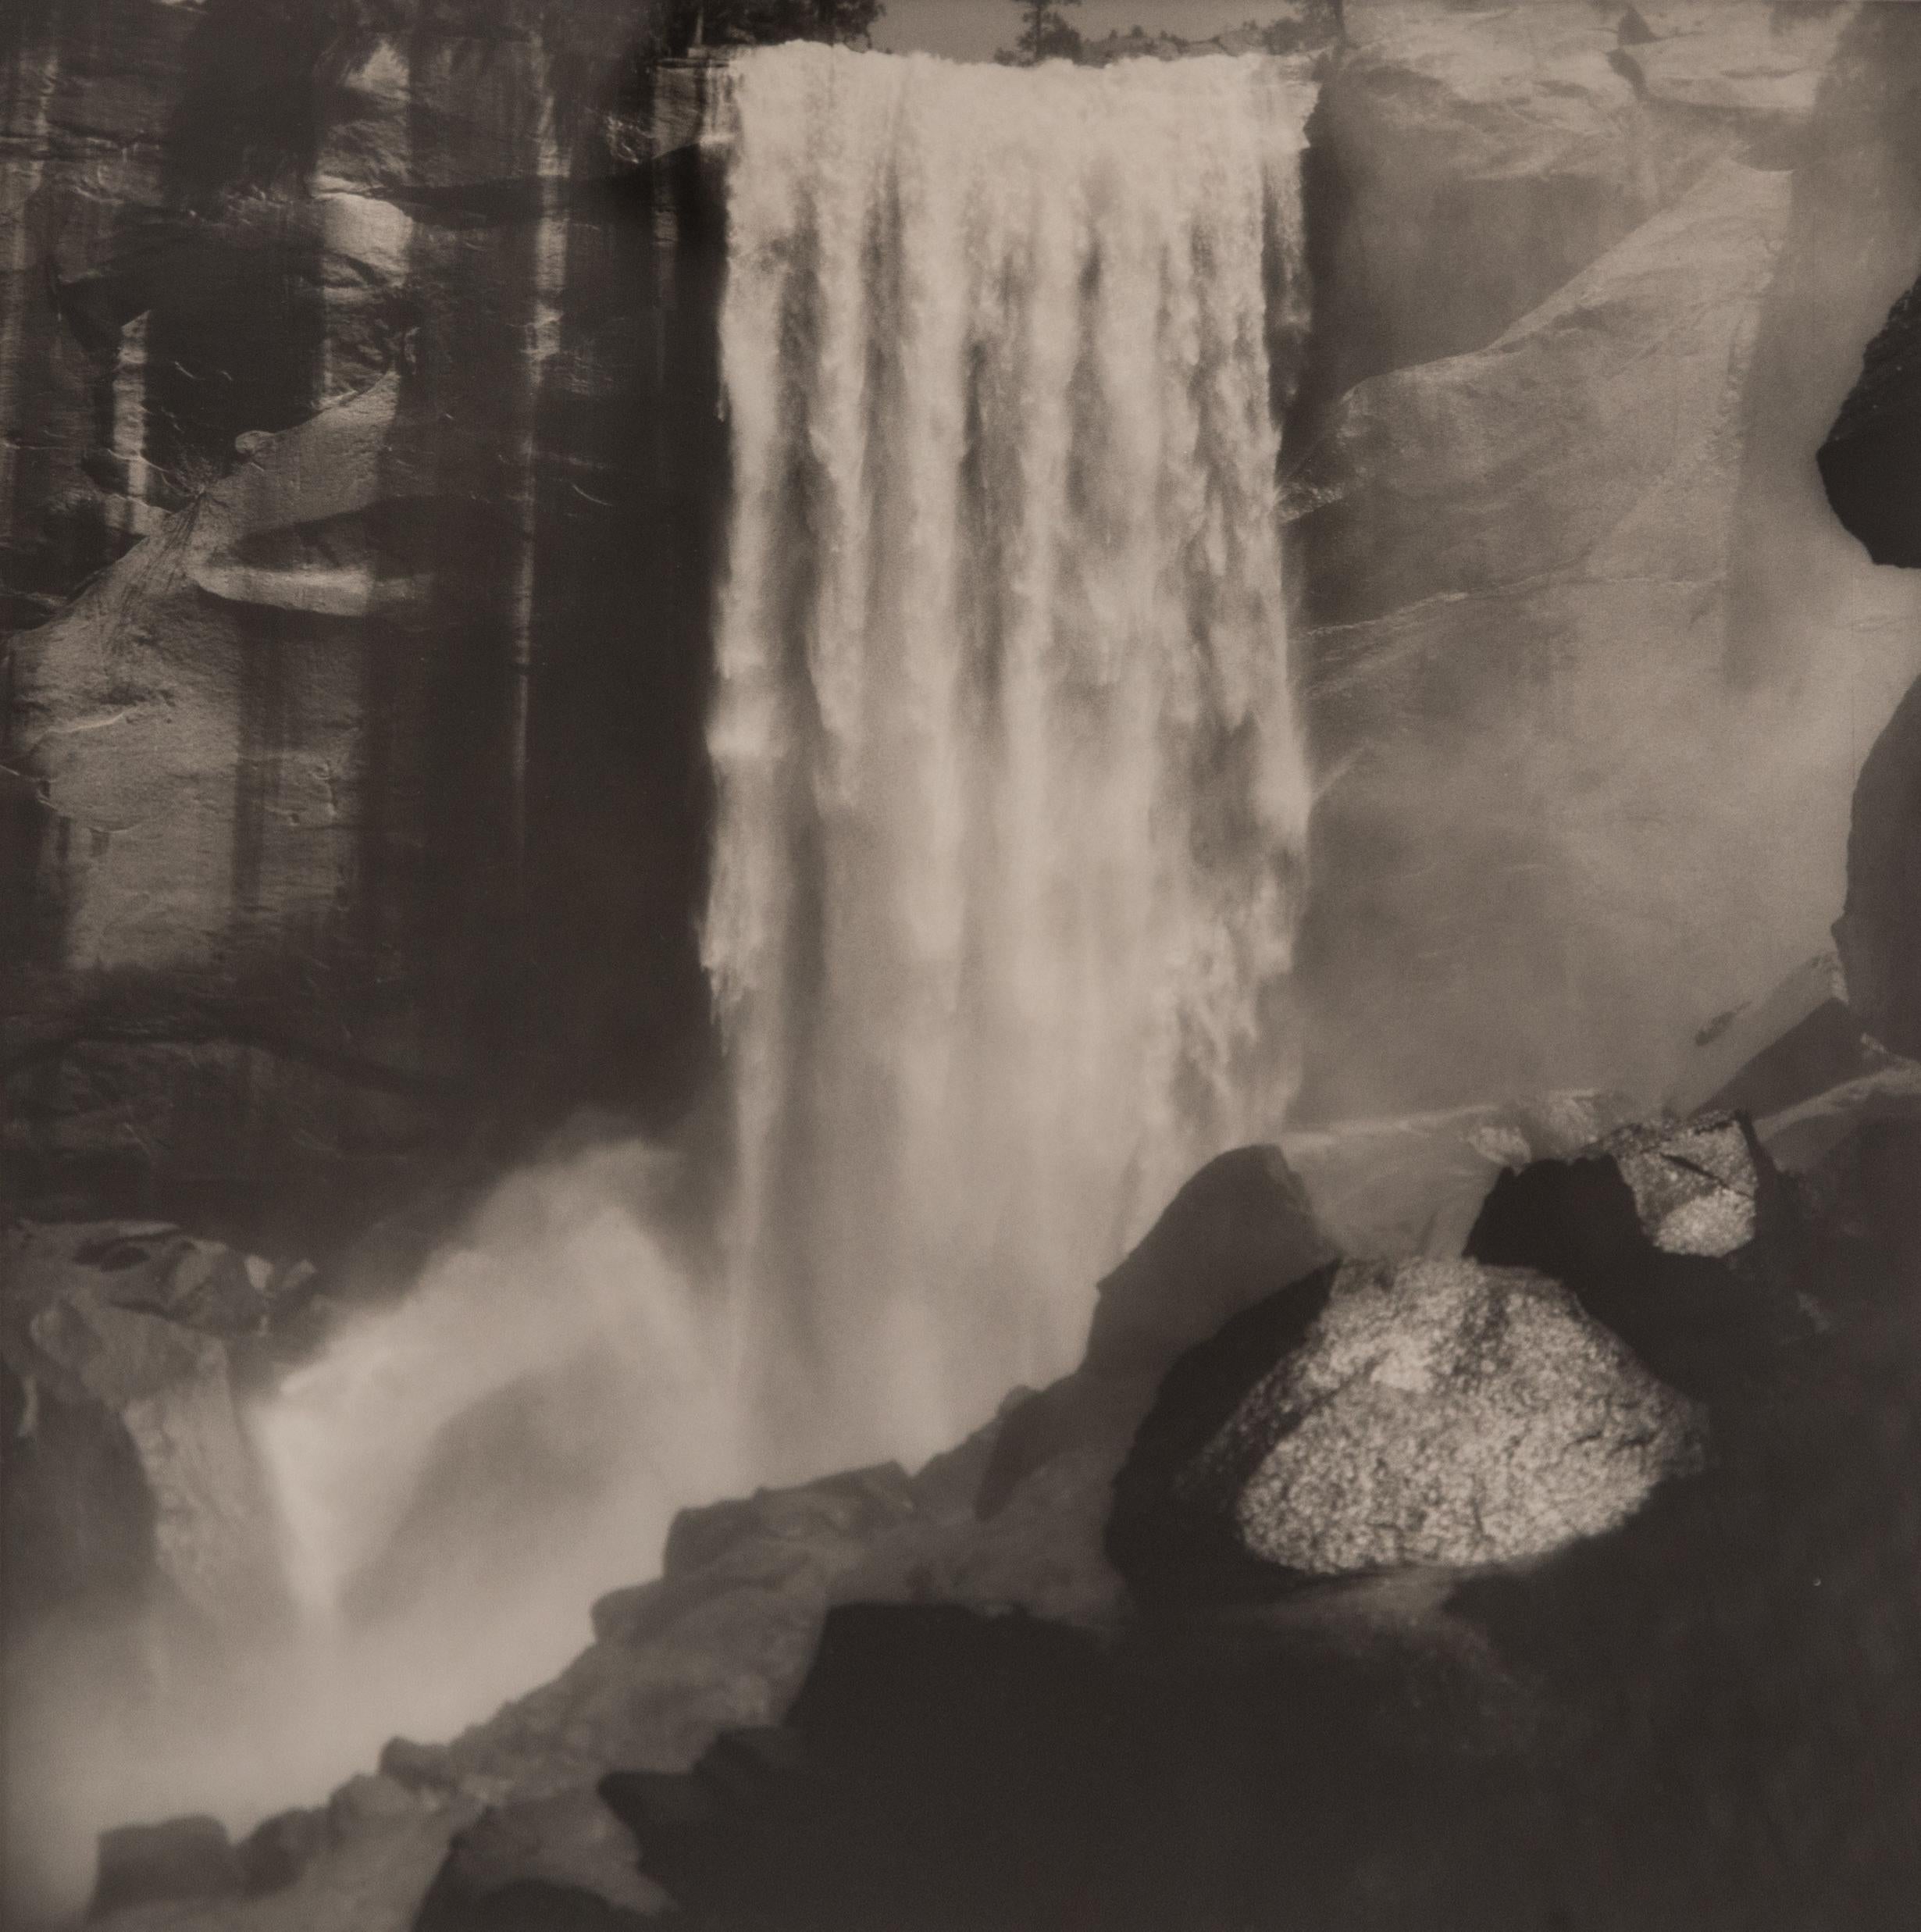 Offered is an original pencil signed gelatin silver photograph by Sally Gall. This is the image of vernal falls, 1993. That was displayed in the Whitney Museum exhibition Gall is the recipient of several major awards, including a National Endowment